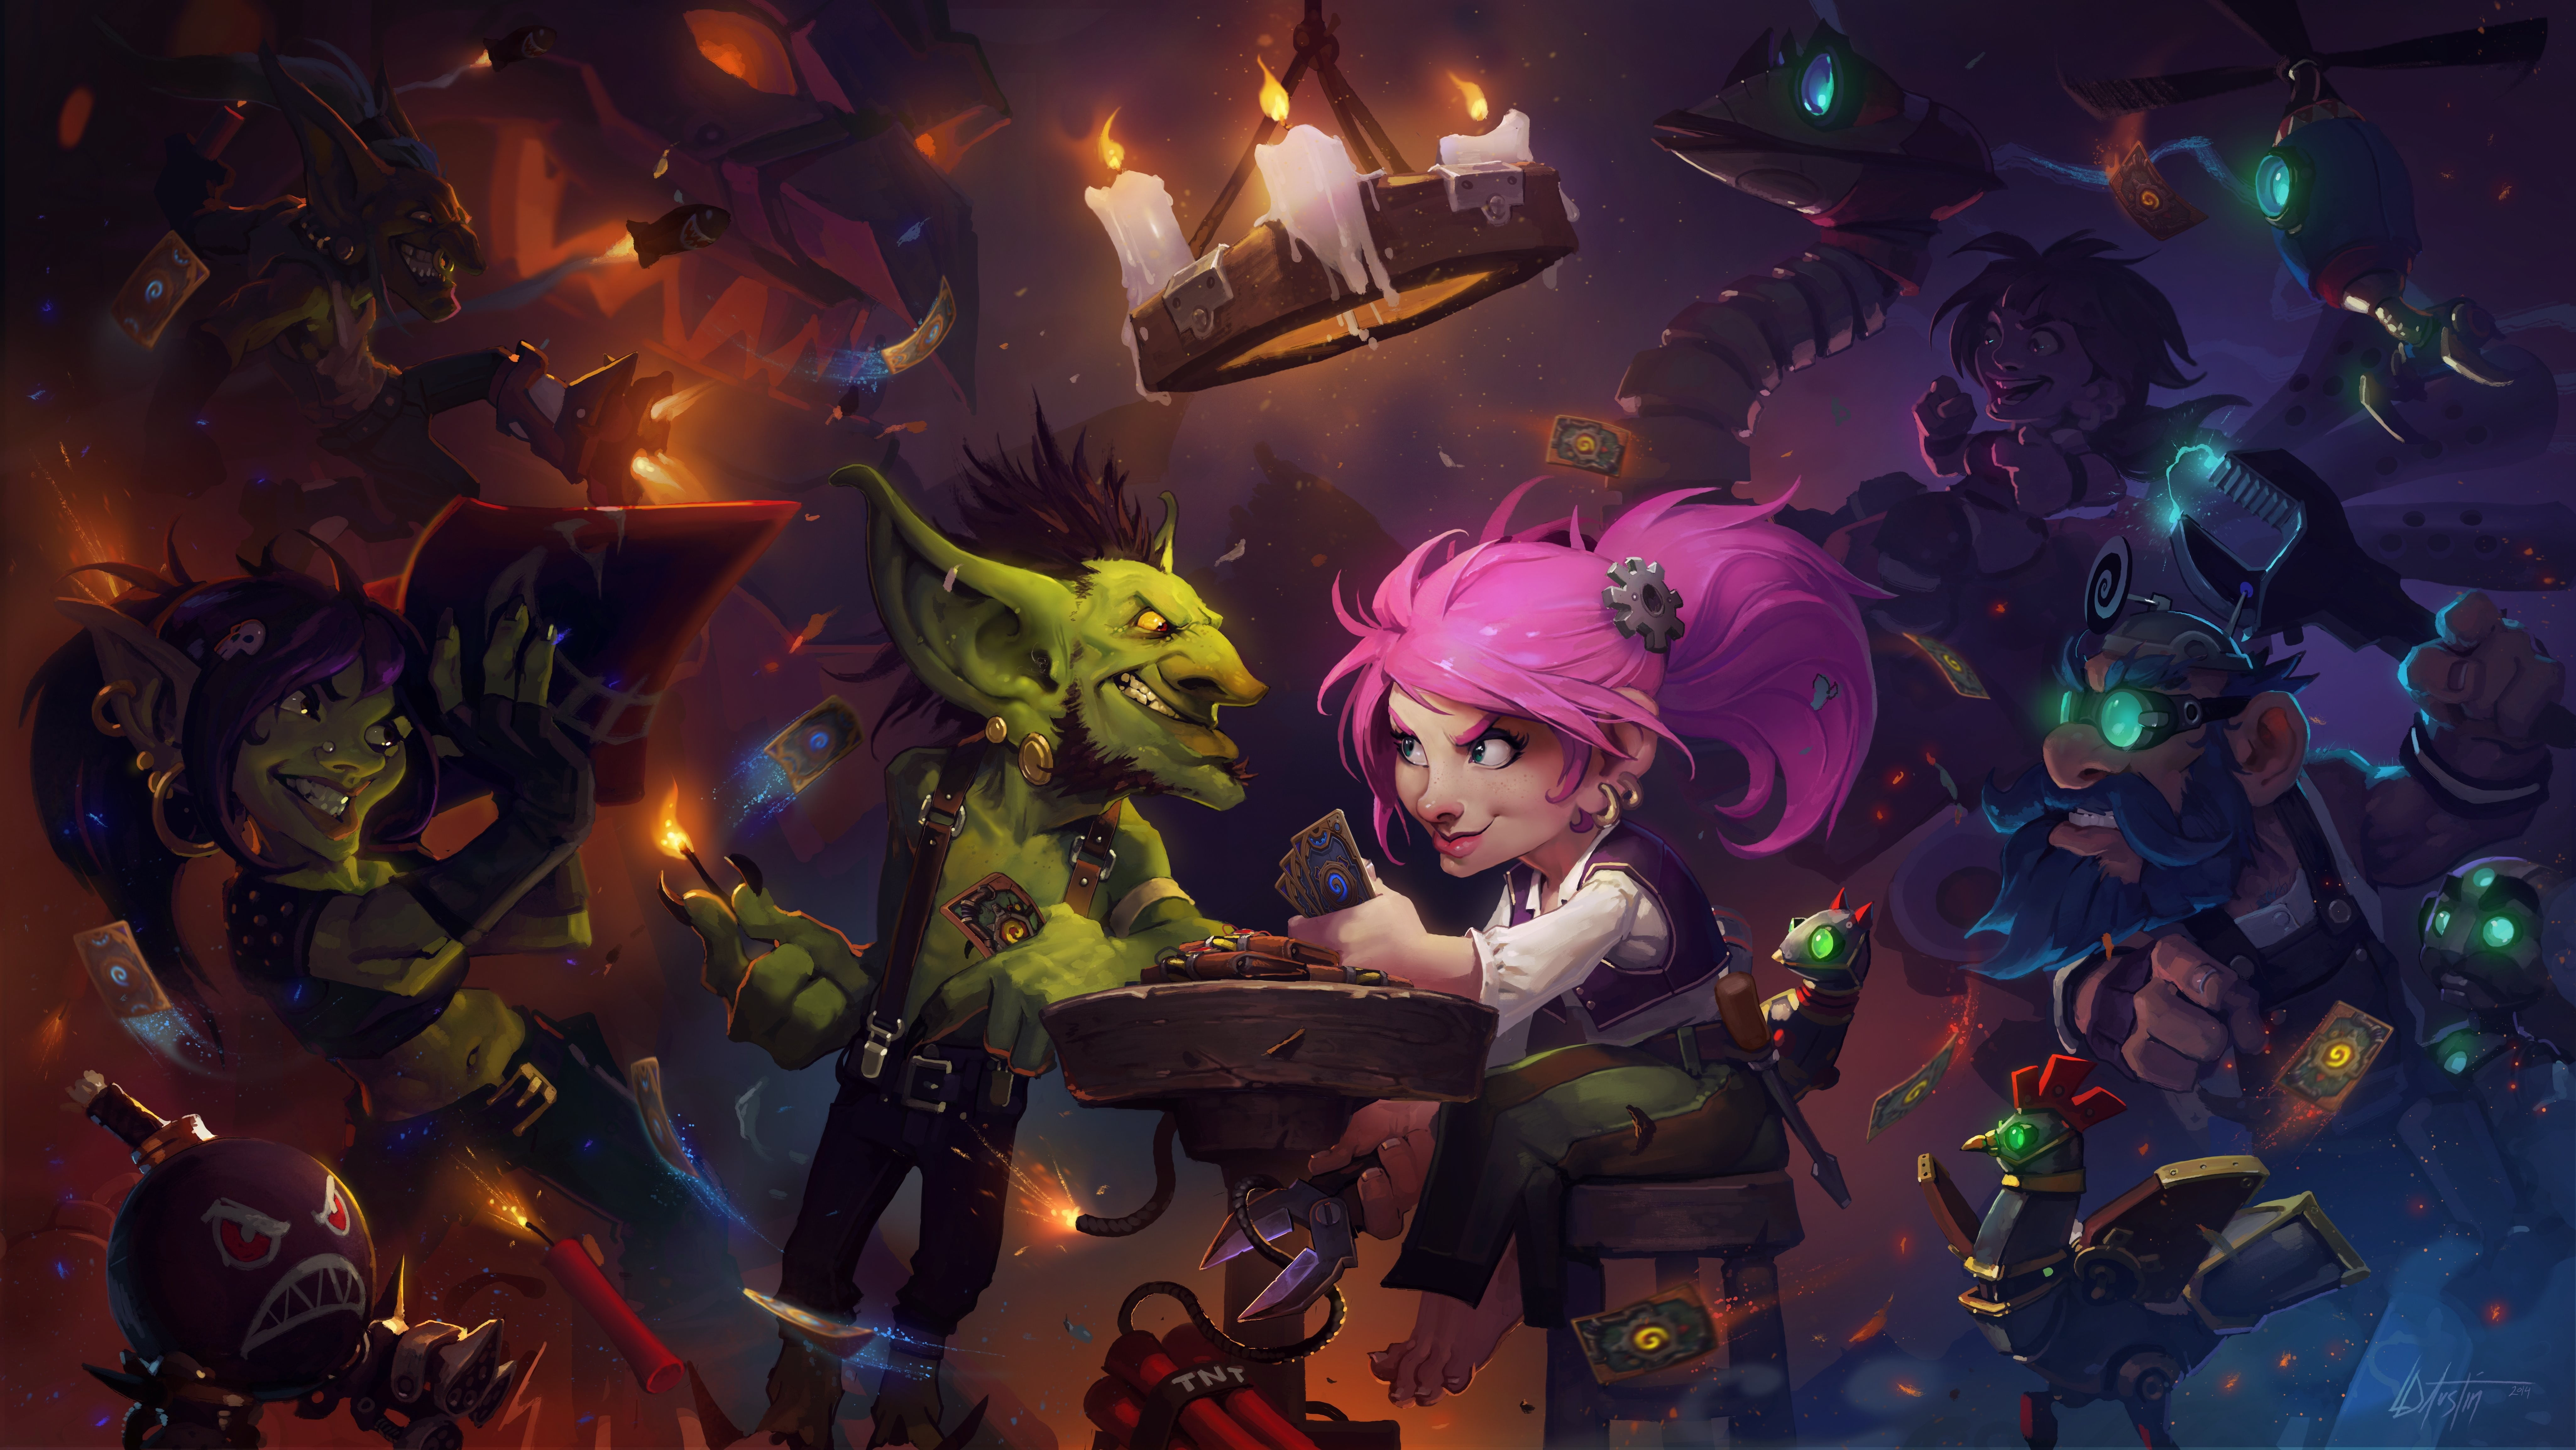 Wallpaper Goblin And Pink Haired Girl, Hearthstone Wallpaper, Game